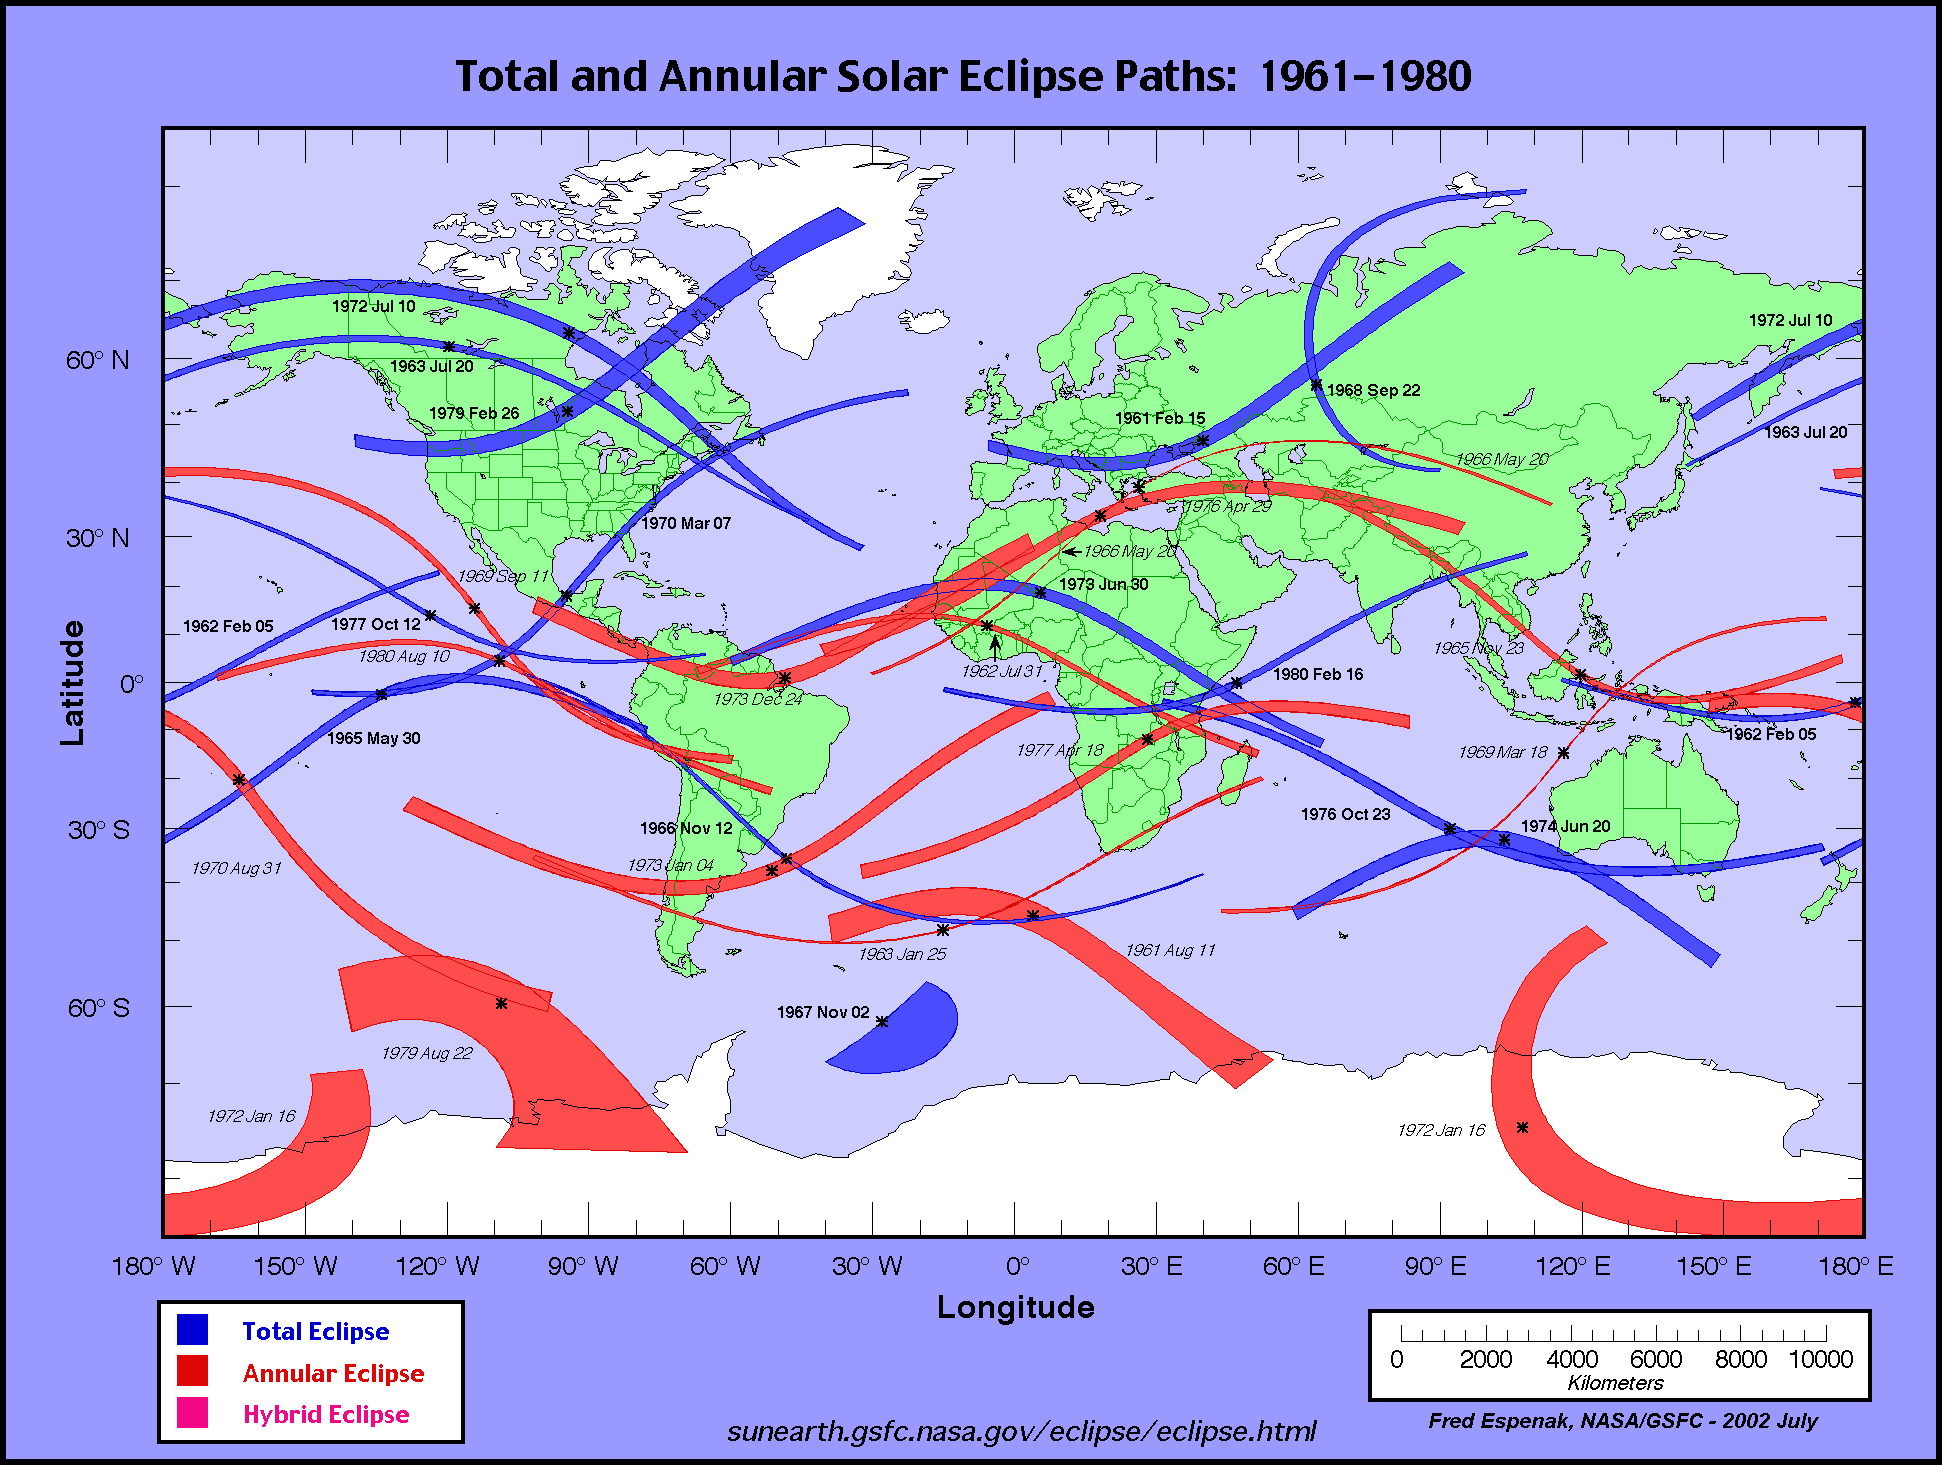 Calendar and solar eclipse maps from 1961 to 1980